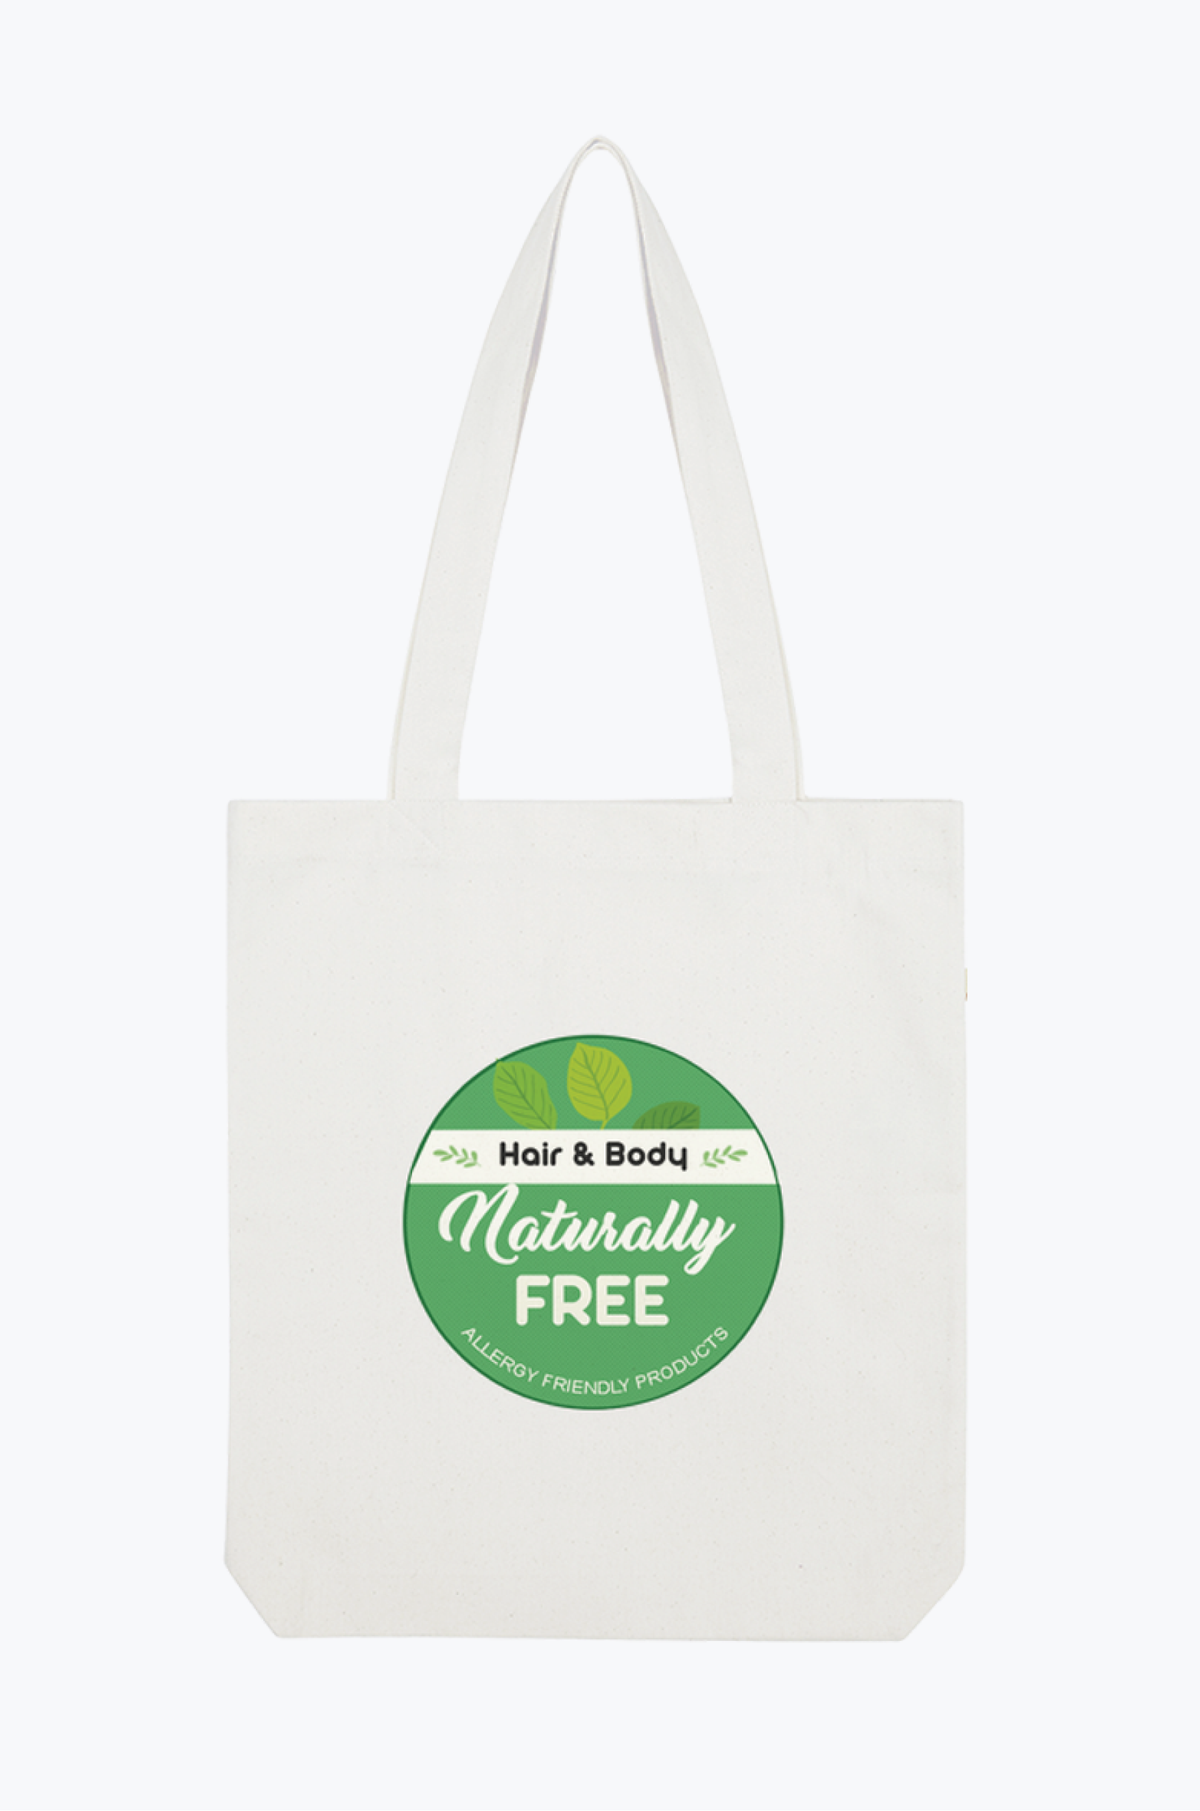 Naturally Free Organic Cotton Tote Bag | Hypoallergenic - Allergy Friendly - Naturally Free